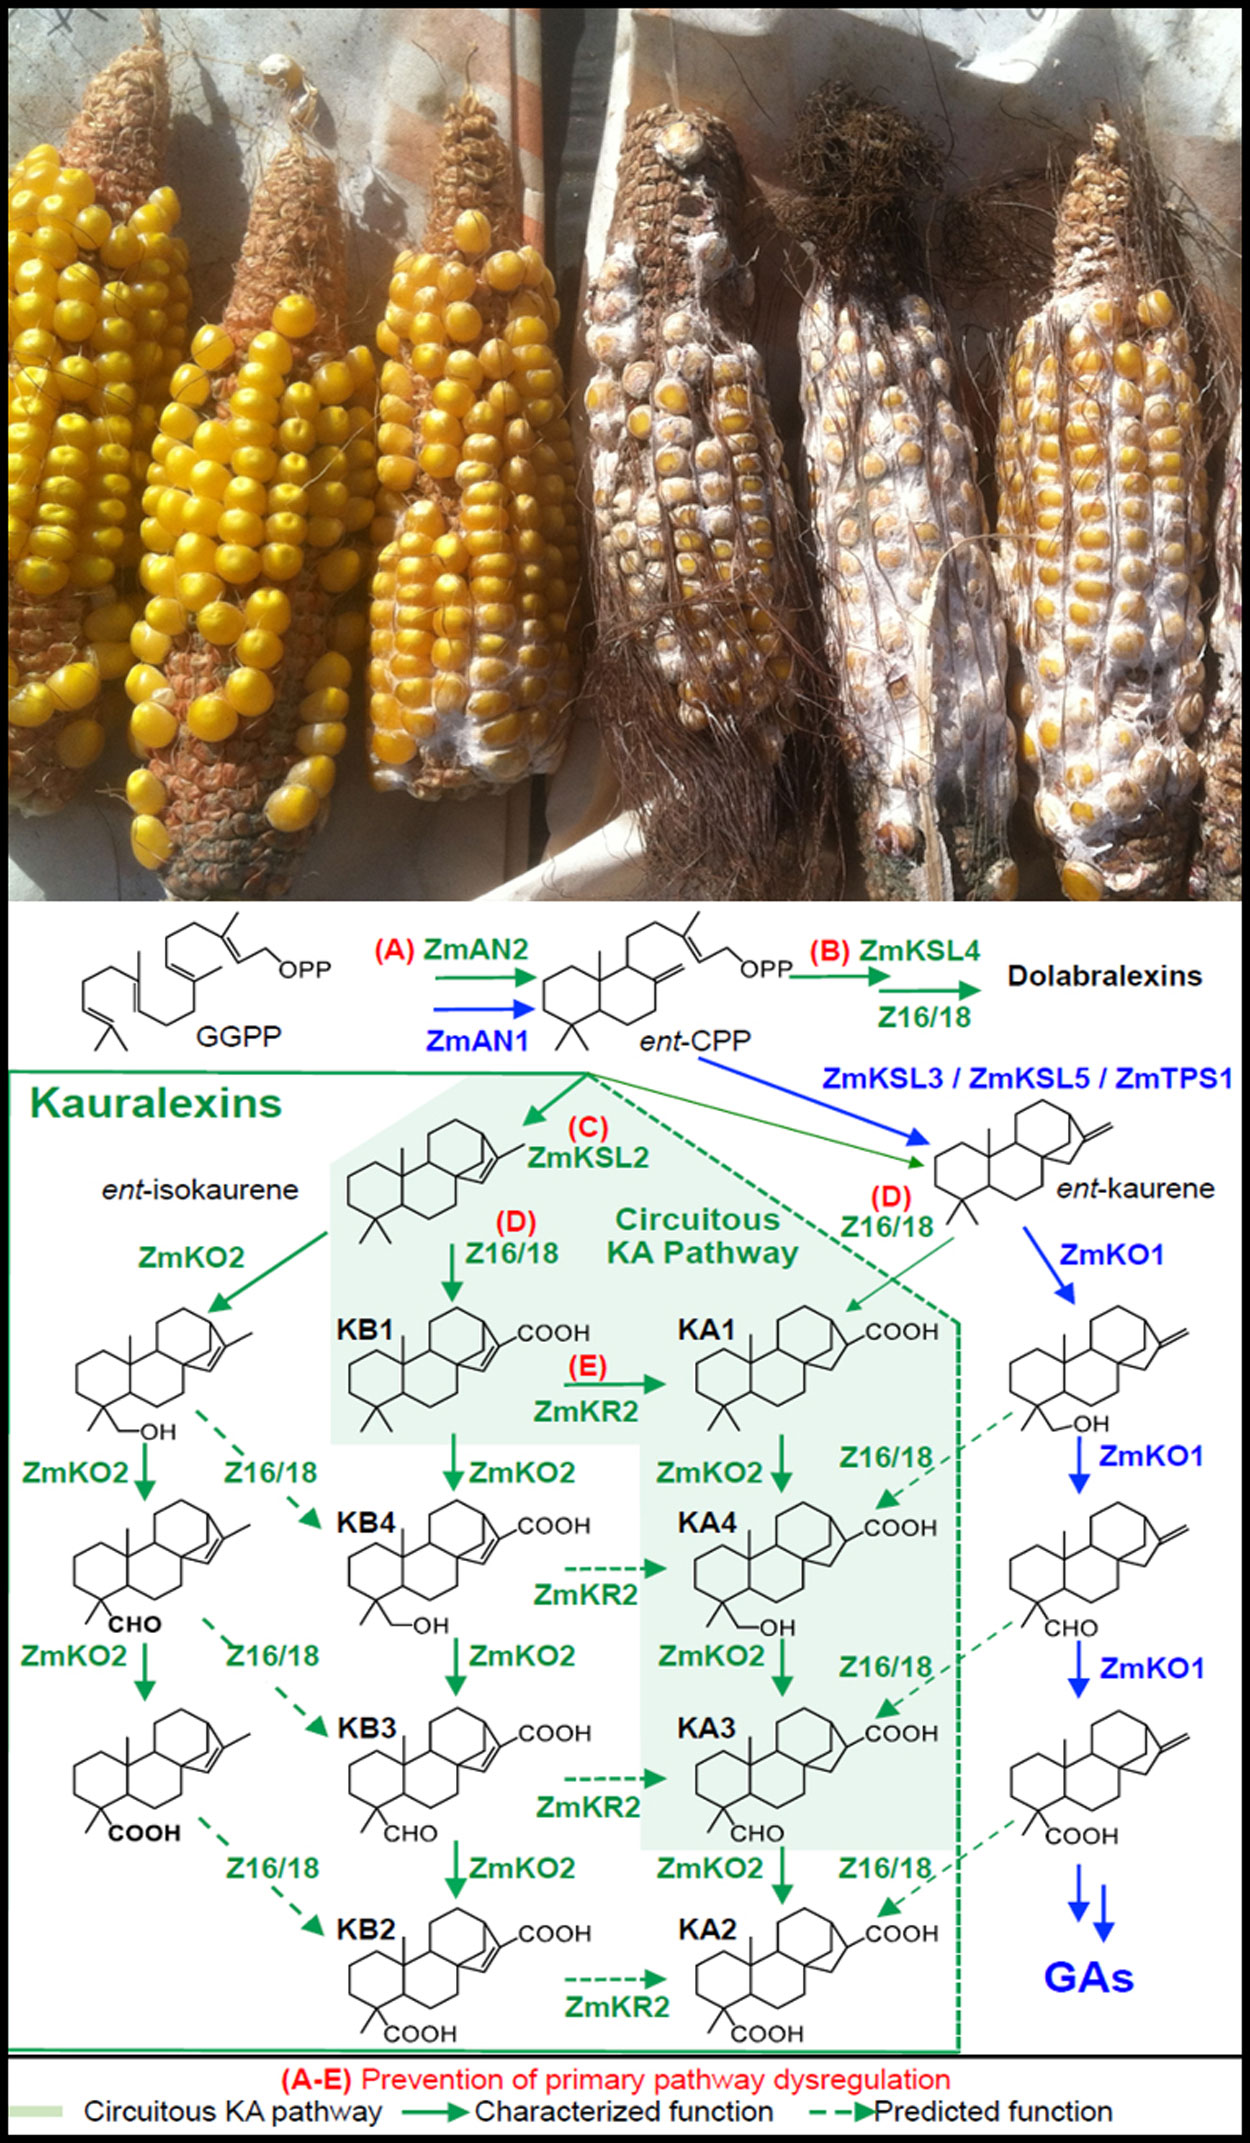 Three maize lined up next to three maize encrusted in white fungi. Figure with organic molecules depicted below the maize.